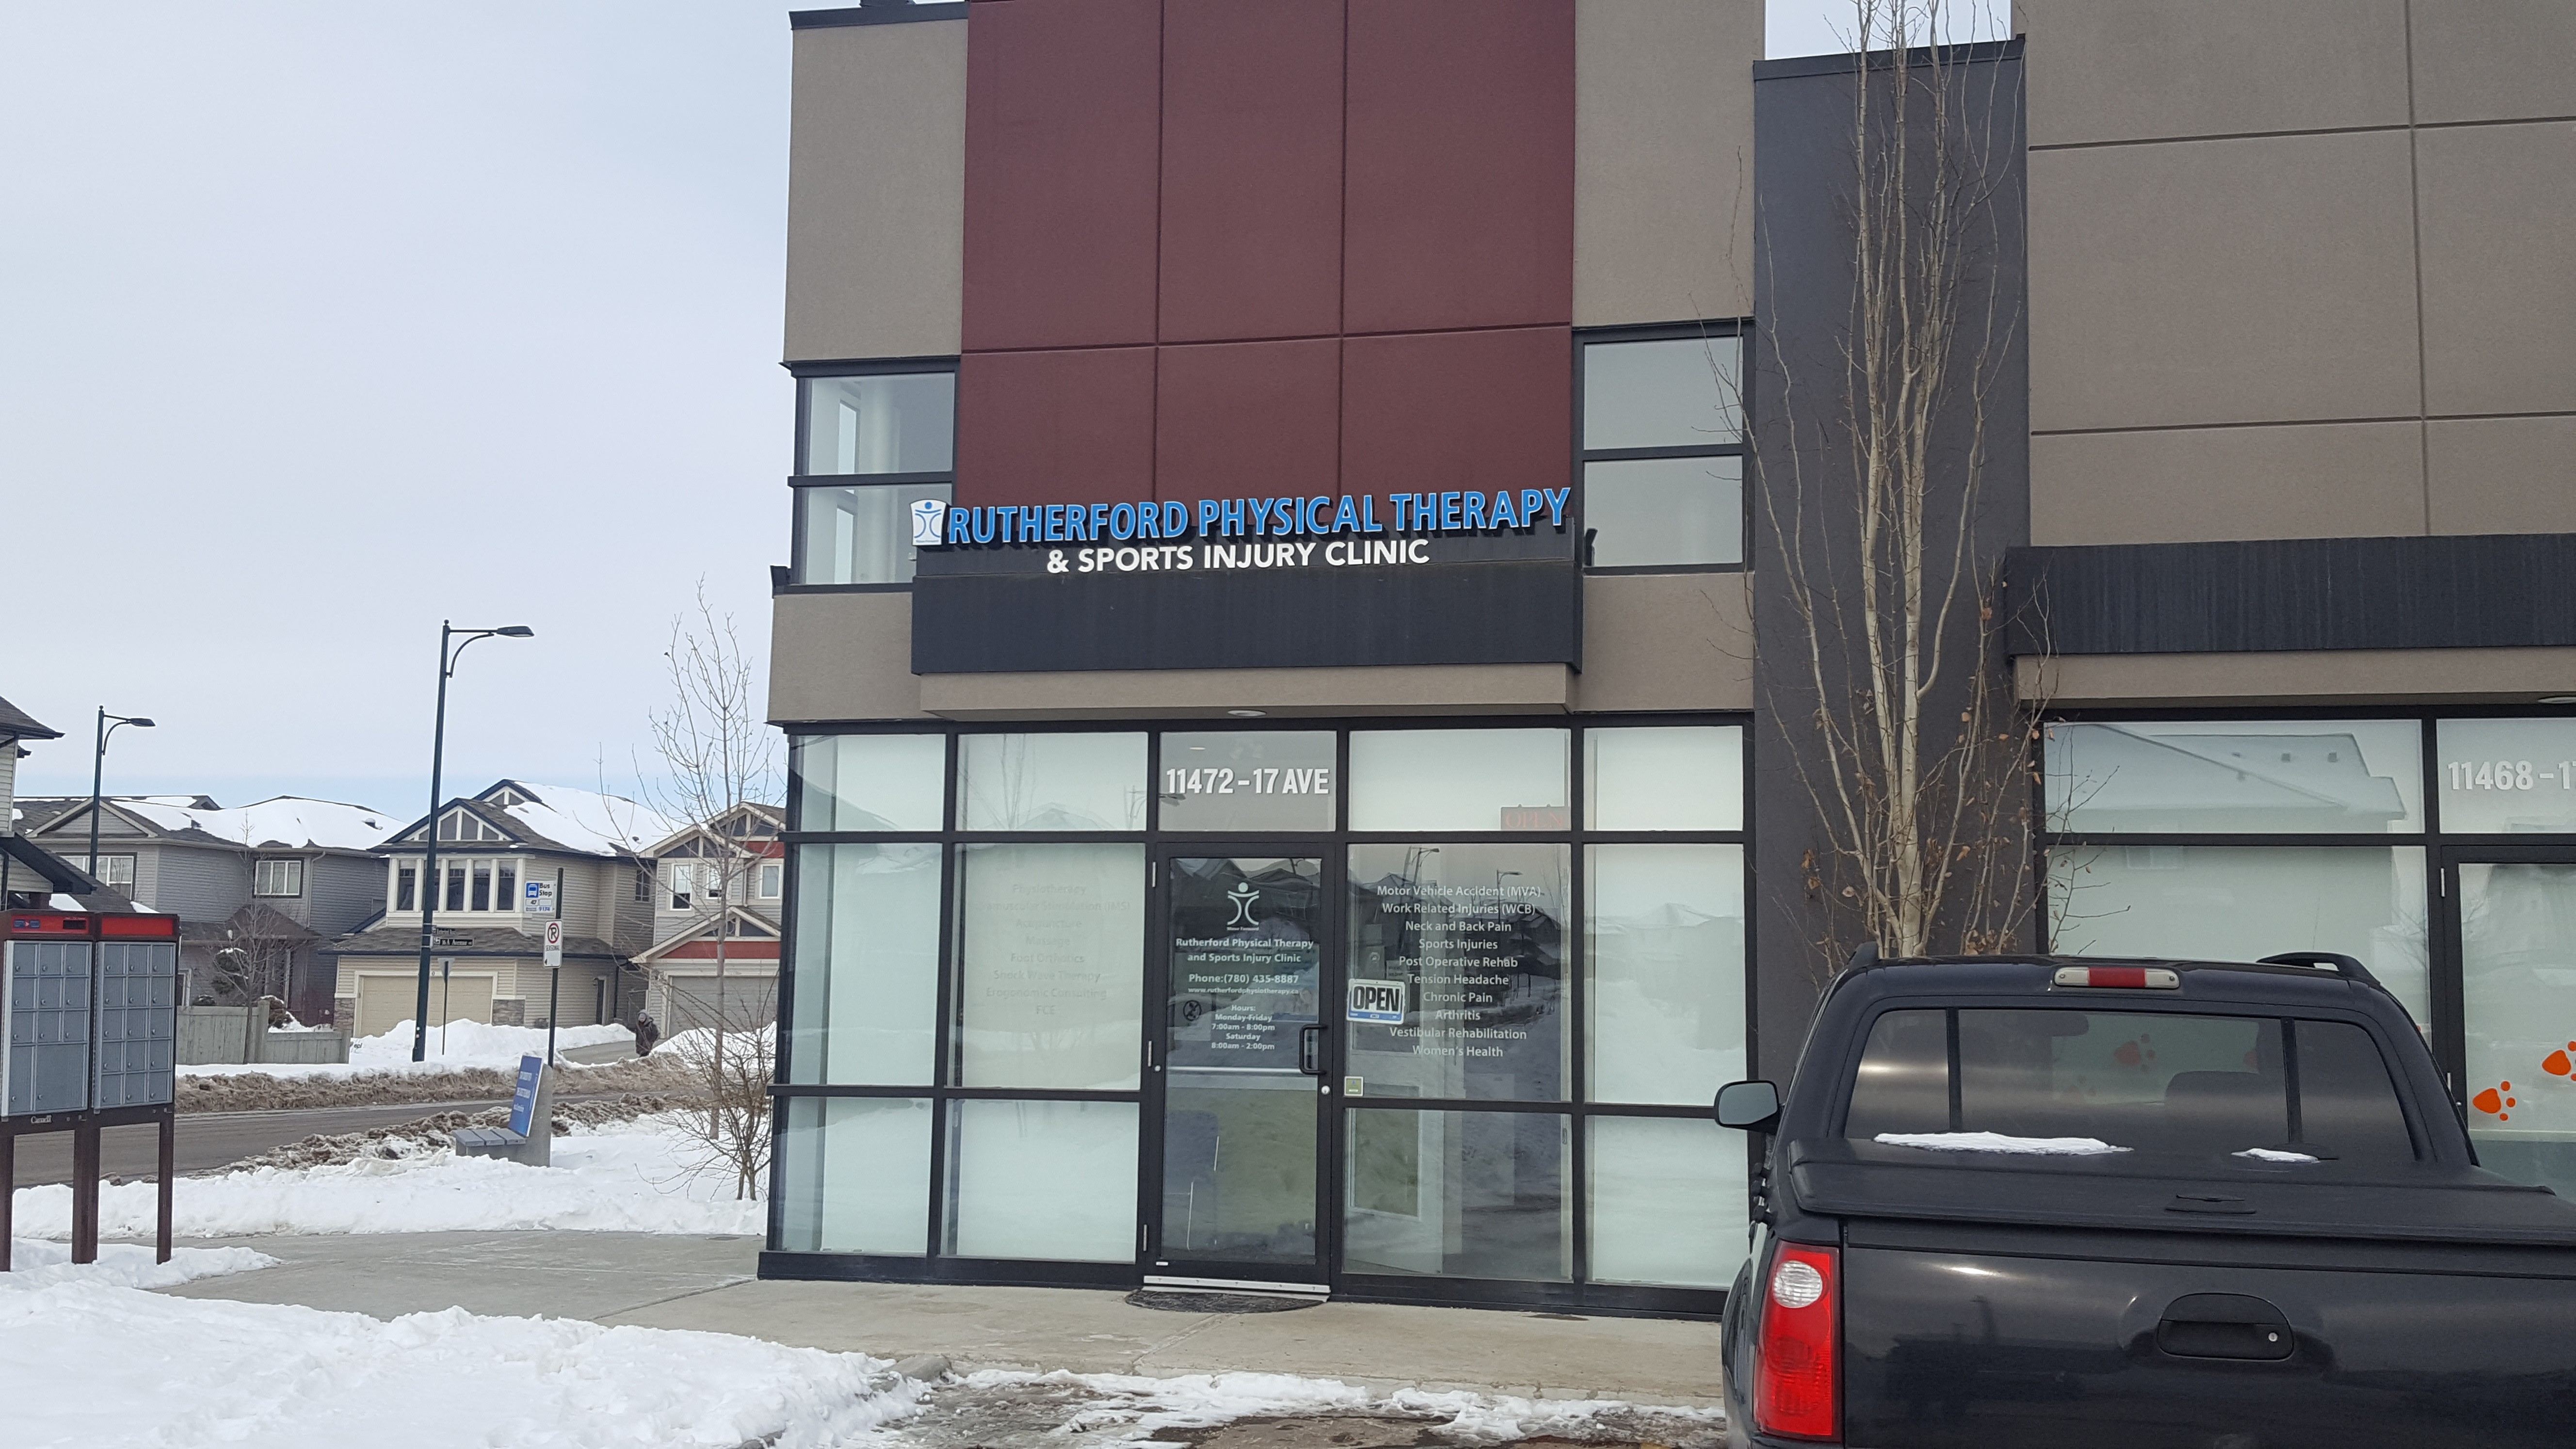 Rutherford Physical Therapy and Sports Injury Clinic